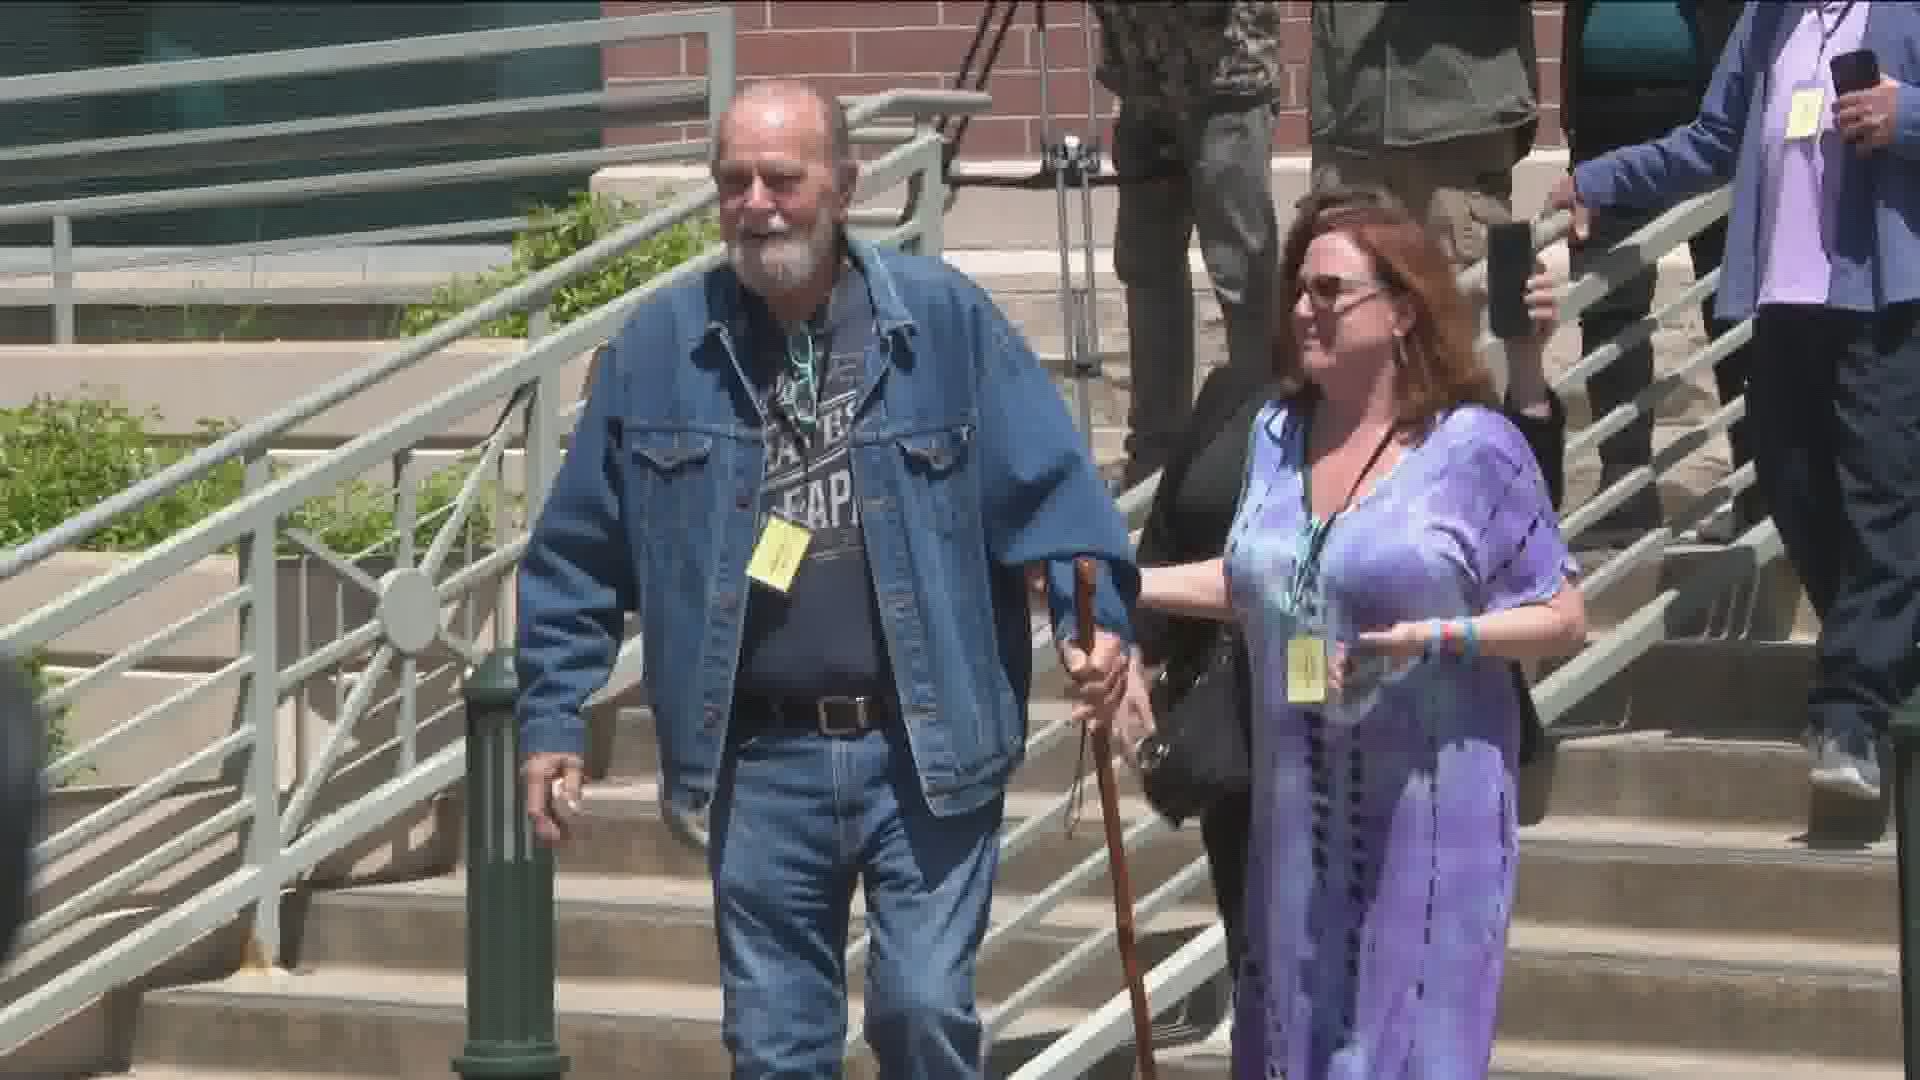 Larry and Kay Woodcock were greeted with cheers from a large crowd outside the courthouse after Lori Vallow was found guilty on all courts on Friday.